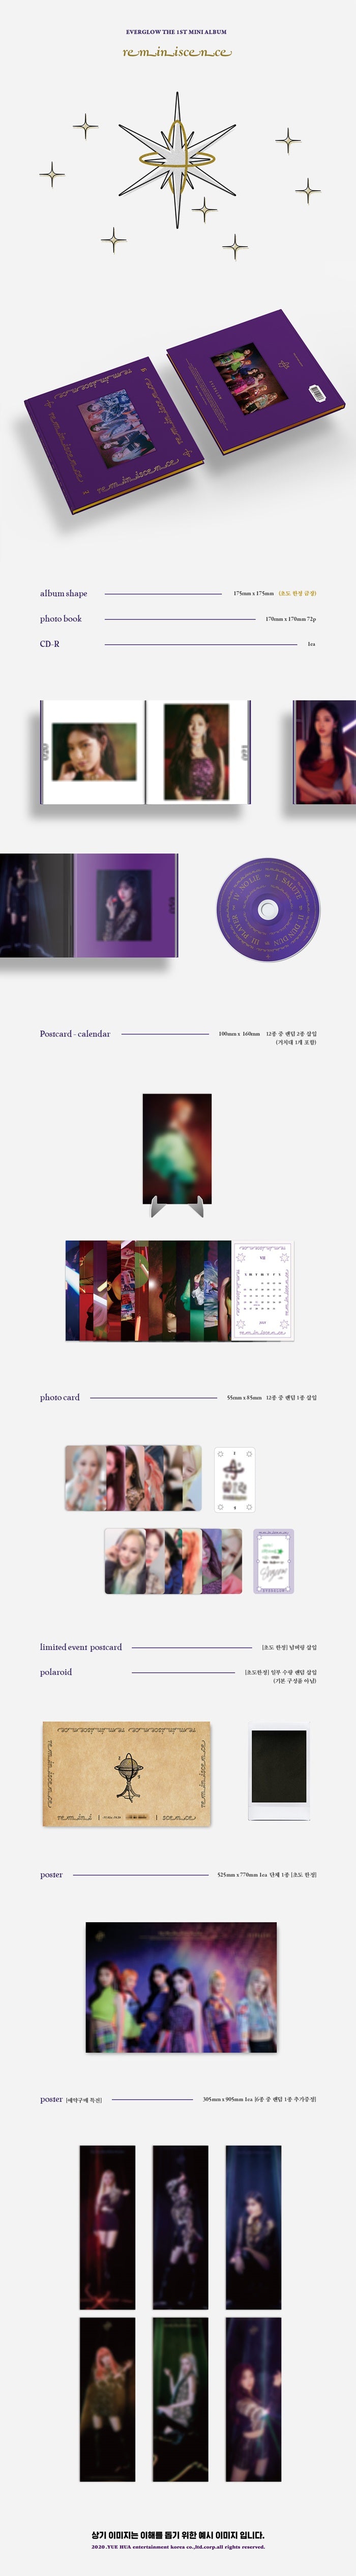 1 CD
1 Photo Book (72 pages)
2 Postcard-calendar With 1ea Holders
1 Photo Card